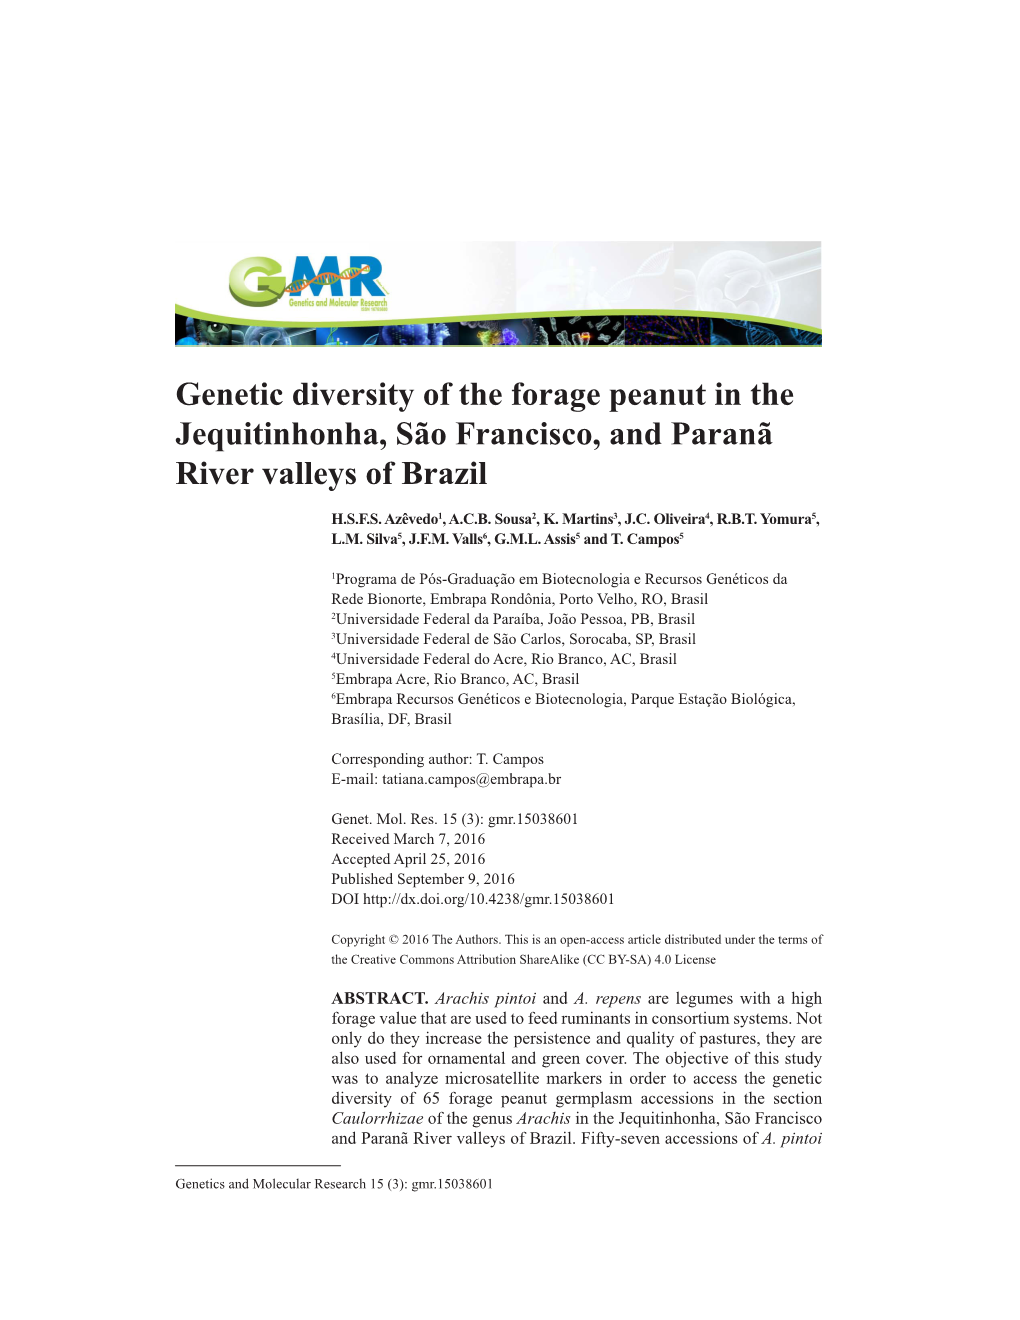 Genetic Diversity of the Forage Peanut in the Jequitinhonha, São Francisco, and Paranã River Valleys of Brazil